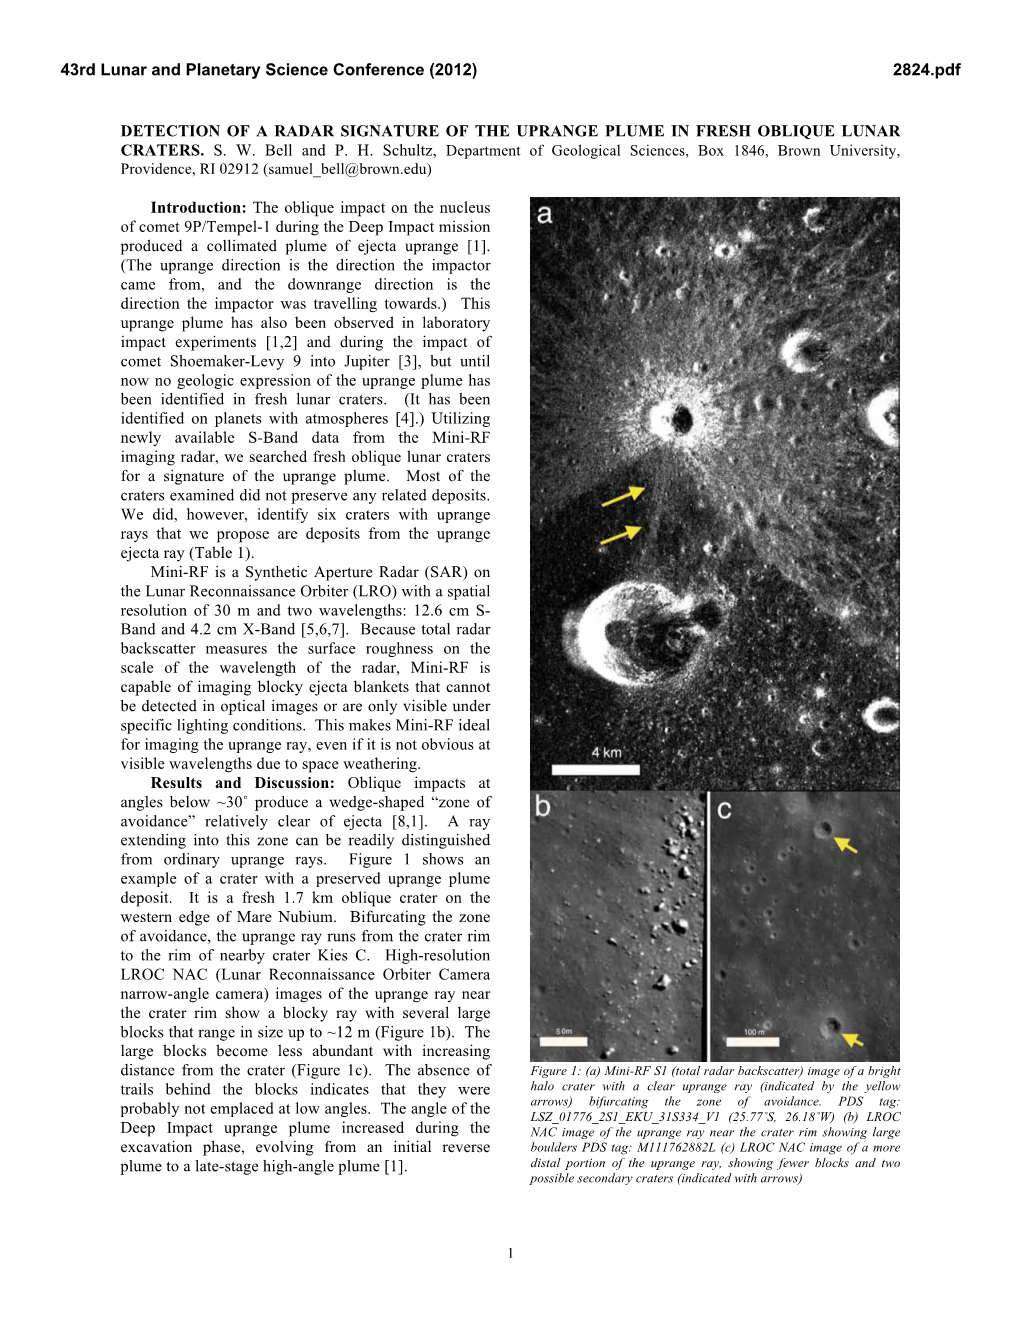 Detection of a Radar Signature of the Uprange Plume in Fresh Oblique Lunar Craters